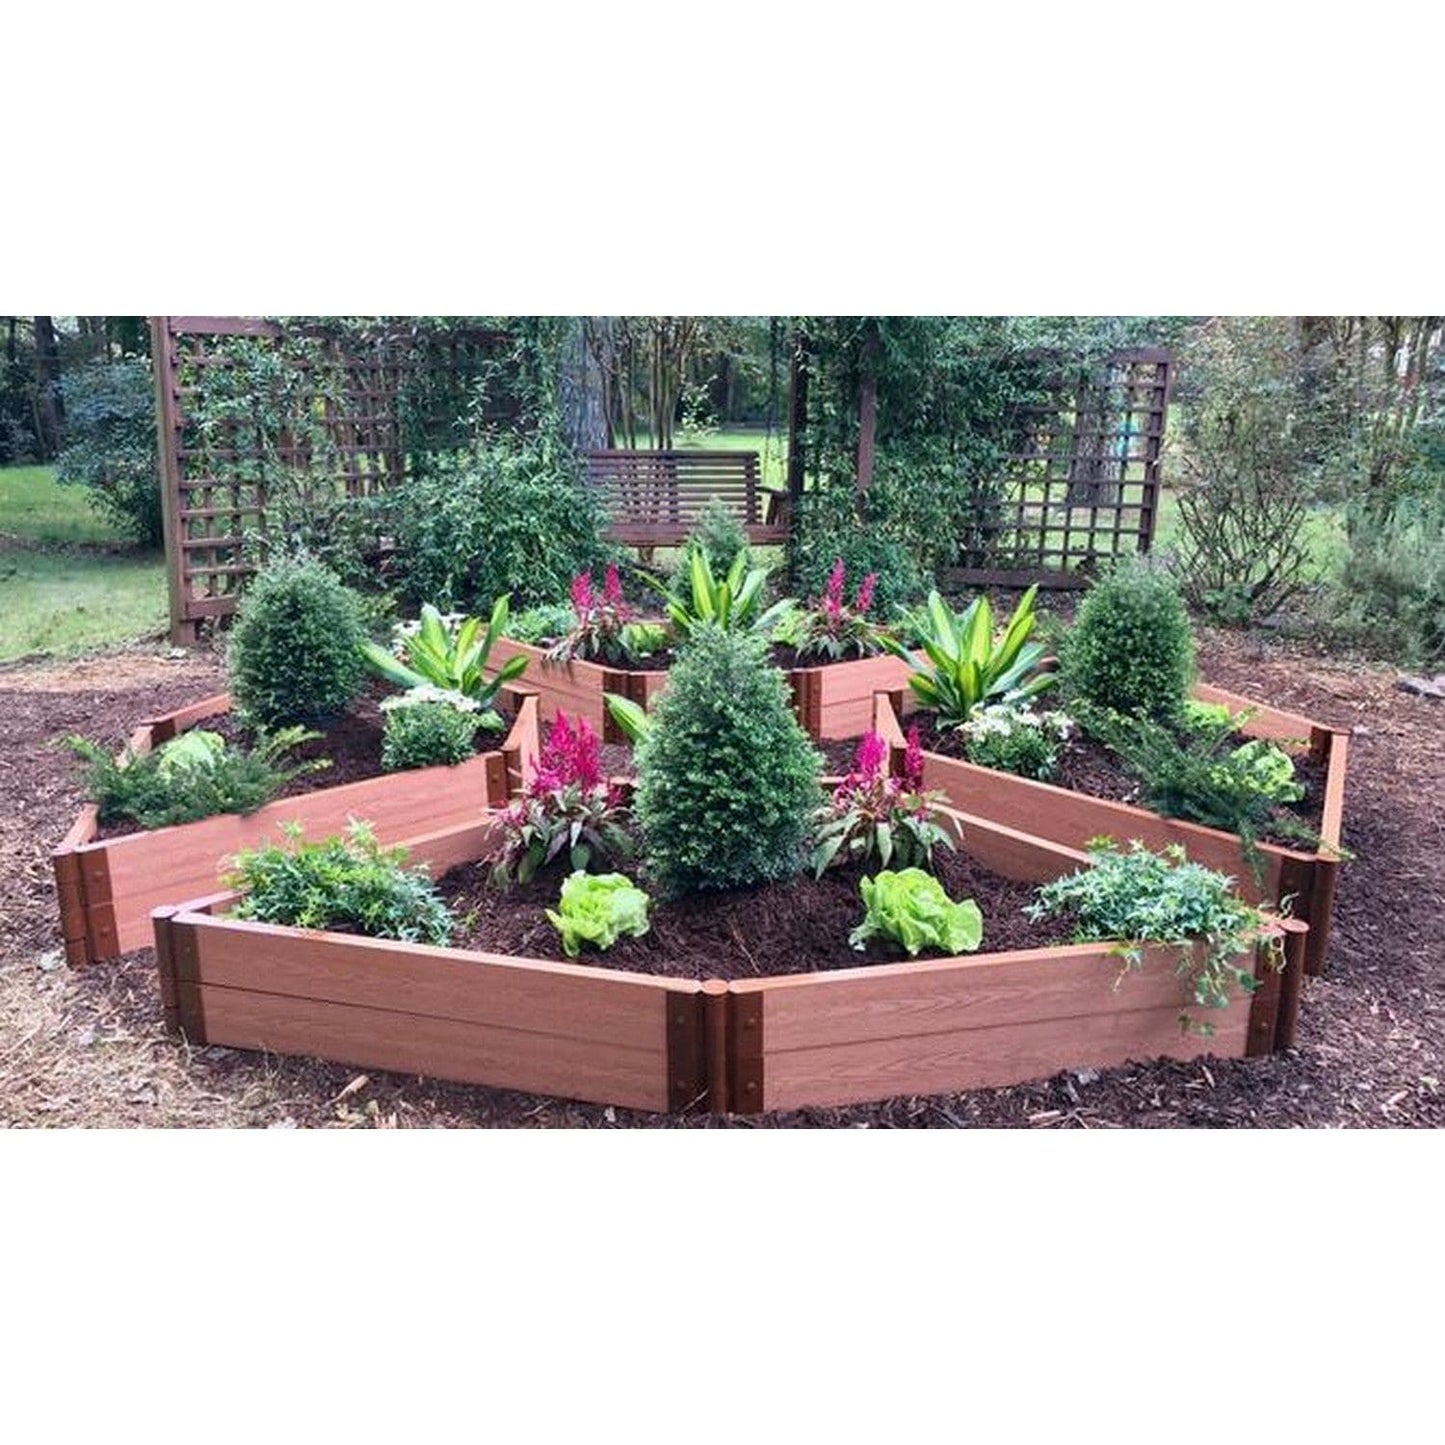 Frame It All Gardening Accessories Frame It All | Tool-Free Elizabethan Garden Raised Garden Bed (4-Sided Triangle) 12' X 12' X 22" - Weathered Wood - 1" Profile 200004476